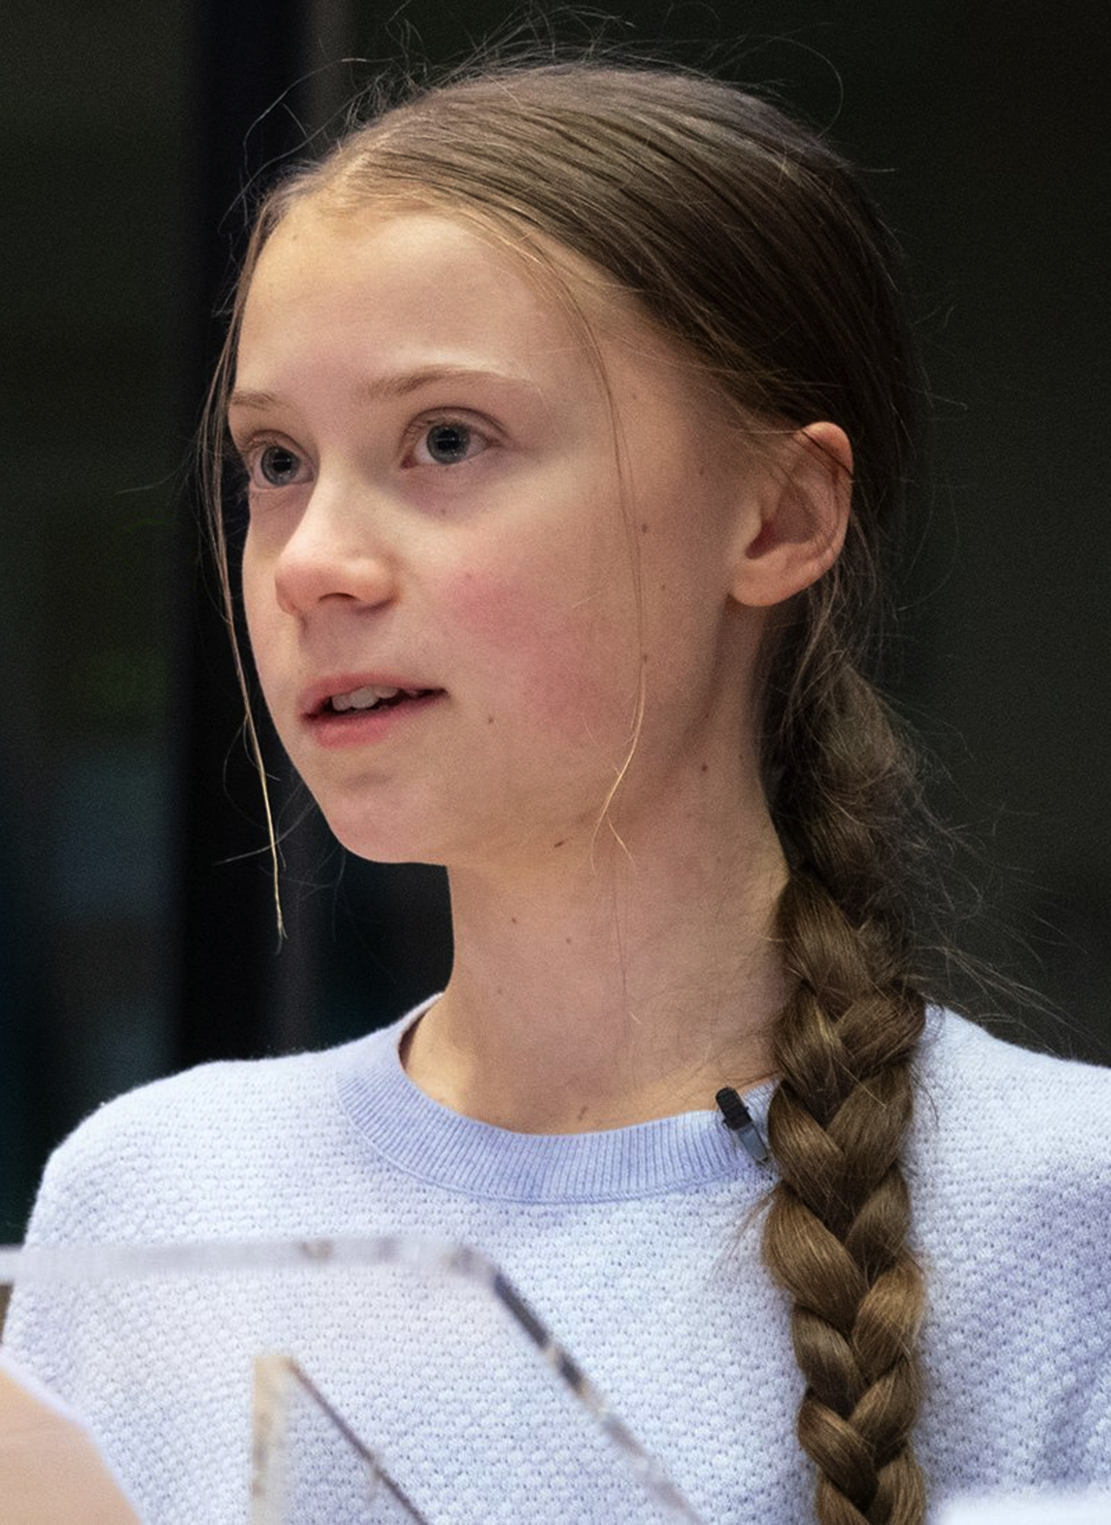 Greta_Thunberg_urges_MEPs_to_show_climate_leadership_(49618310531)_(cropped)